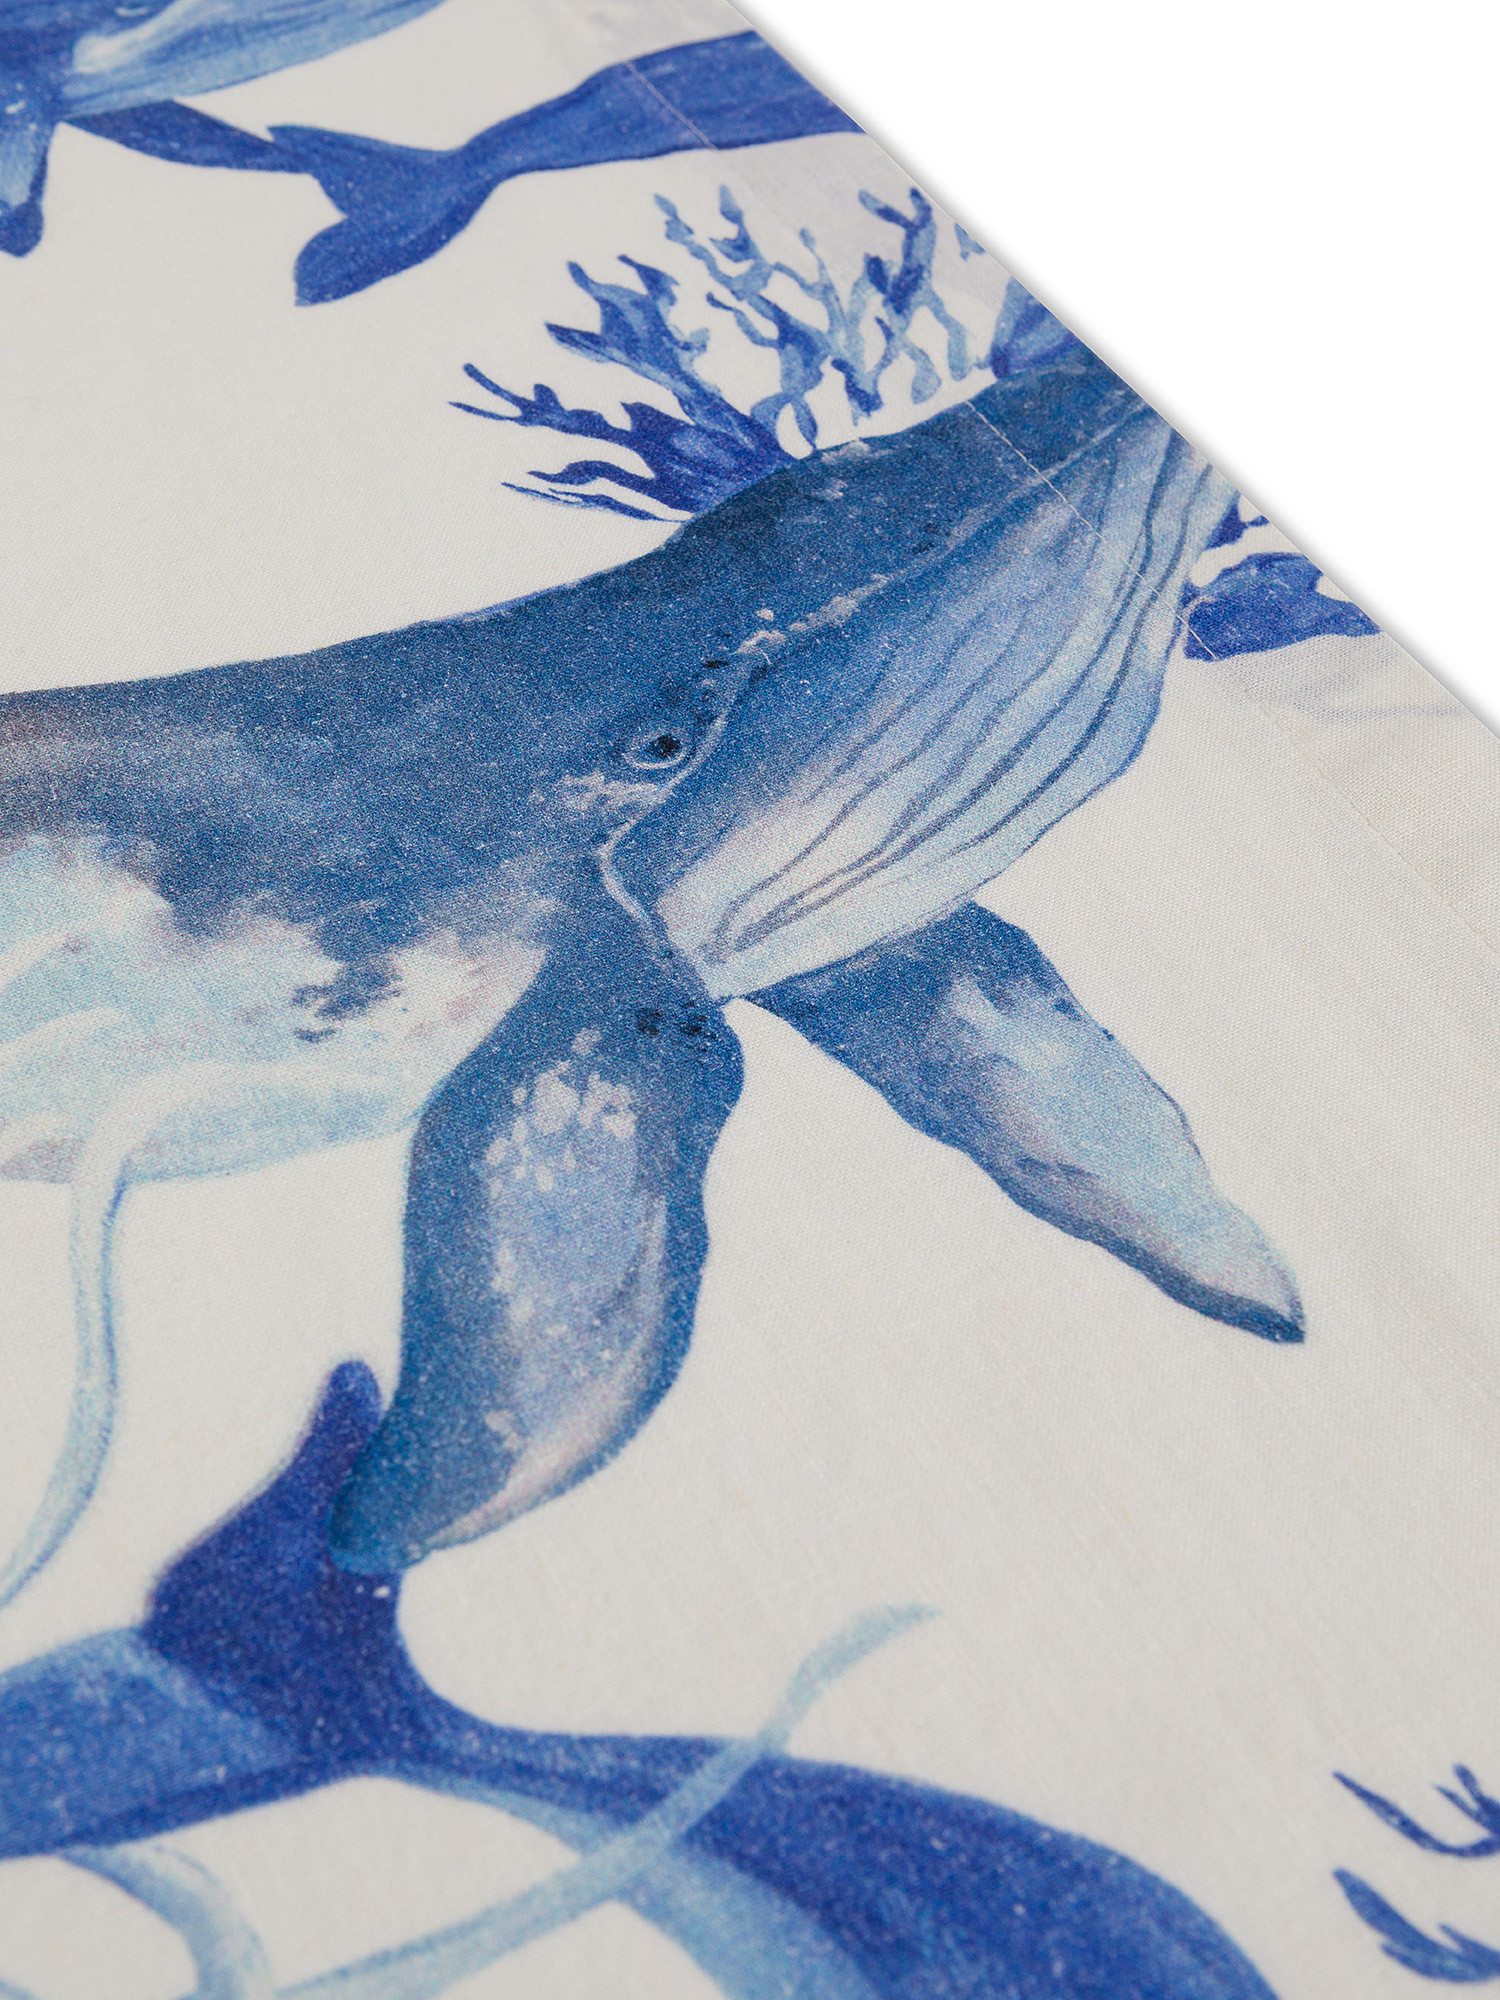 Whale print runner in washed linen blend, White / Blue, large image number 1